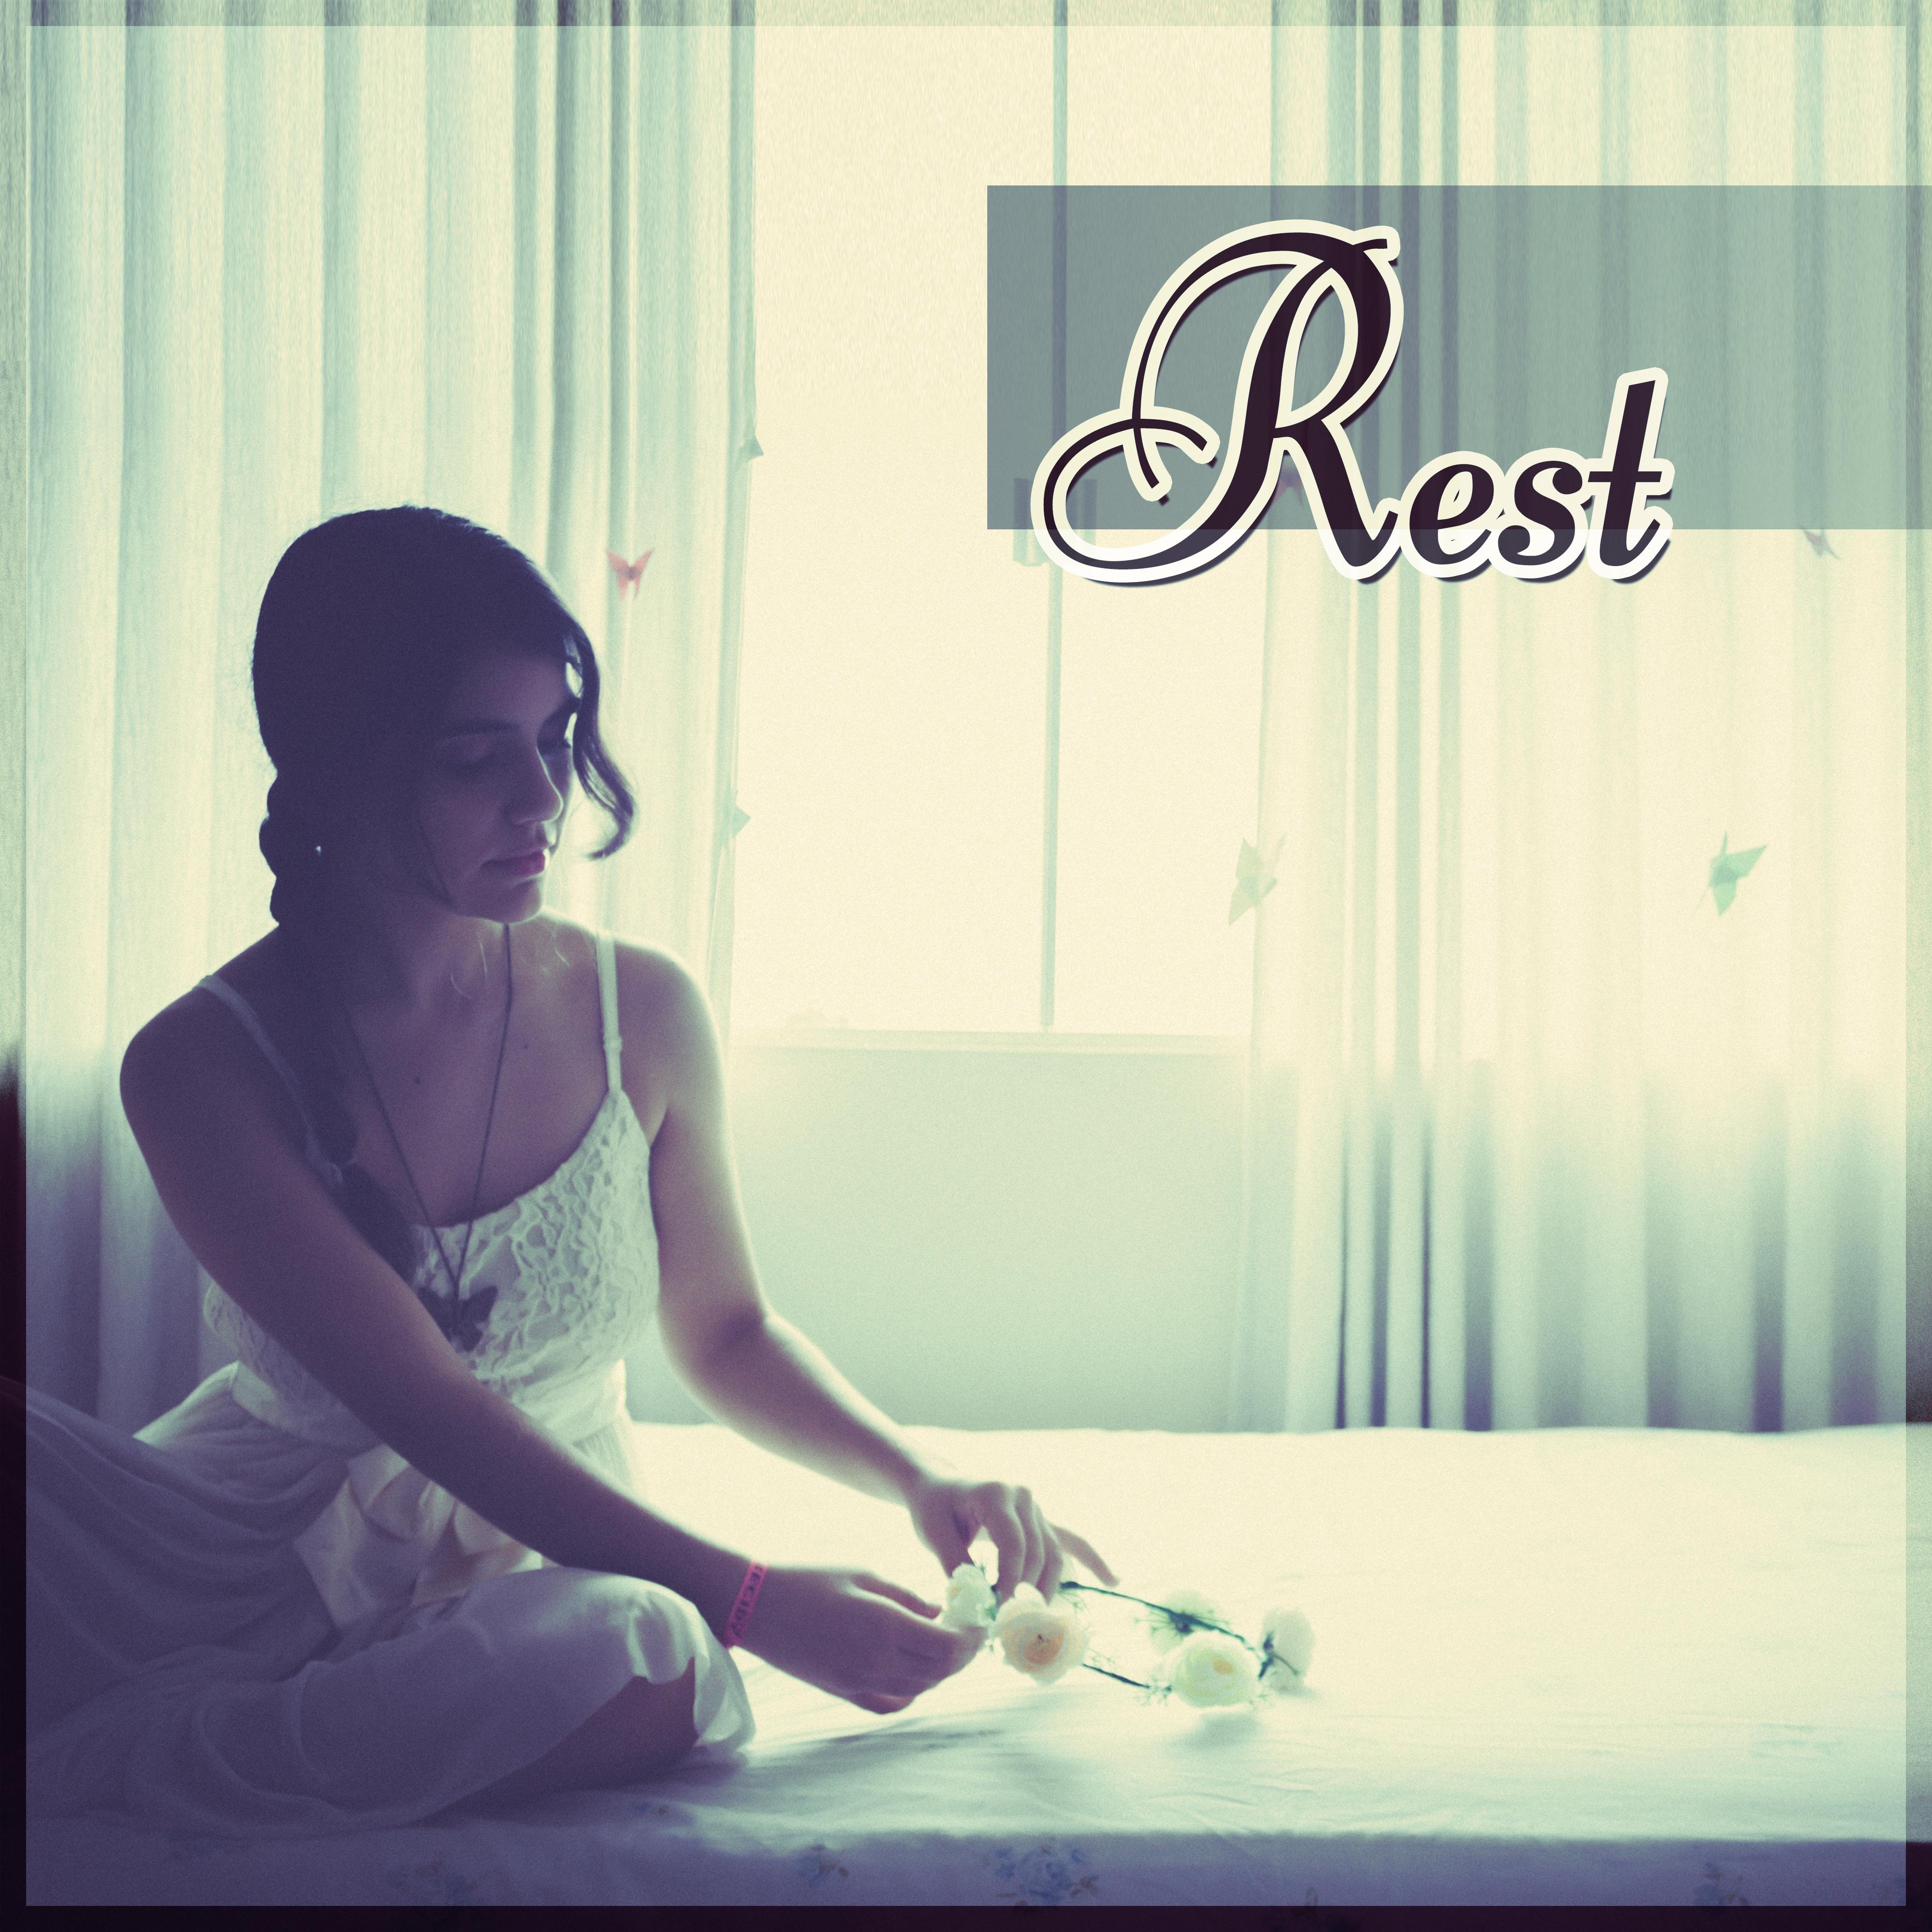 Rest - Reduce Stress, Background Music for Inner Peace, Well Being, Calming Music for Deep Sleep